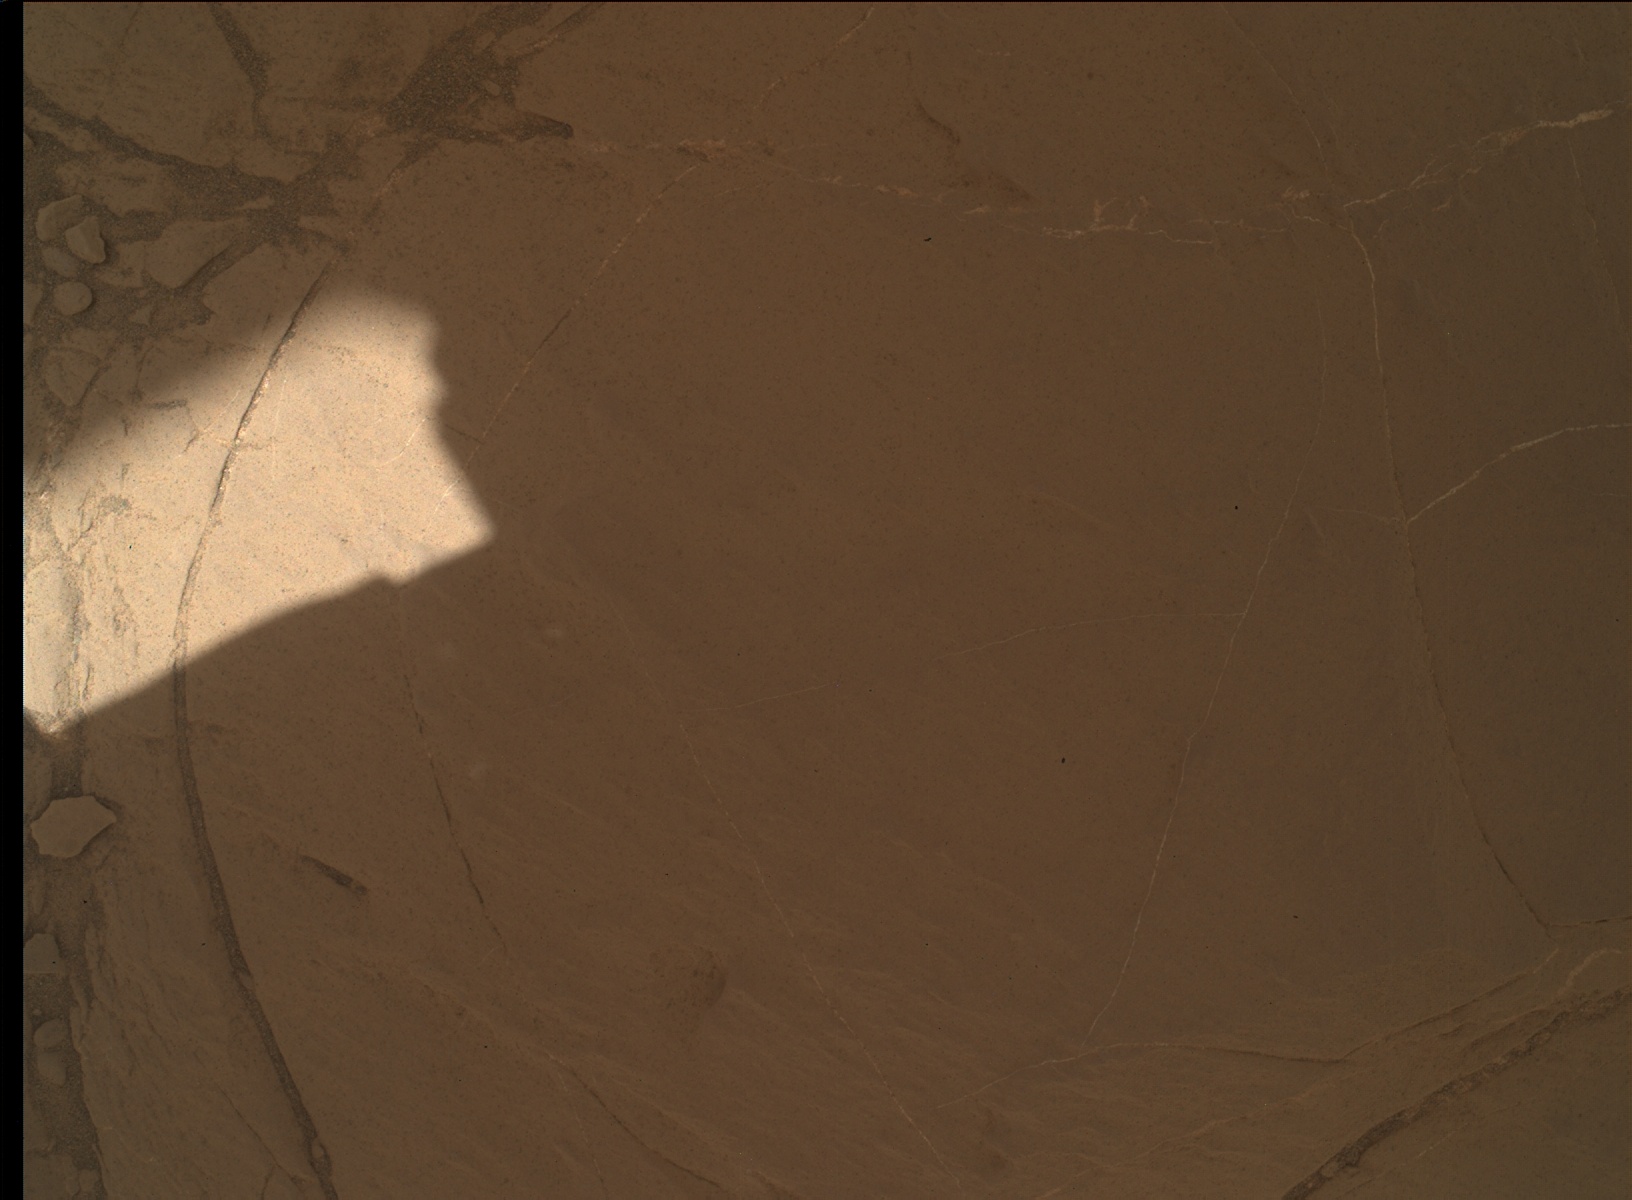 Nasa's Mars rover Curiosity acquired this image using its Mars Hand Lens Imager (MAHLI) on Sol 1848